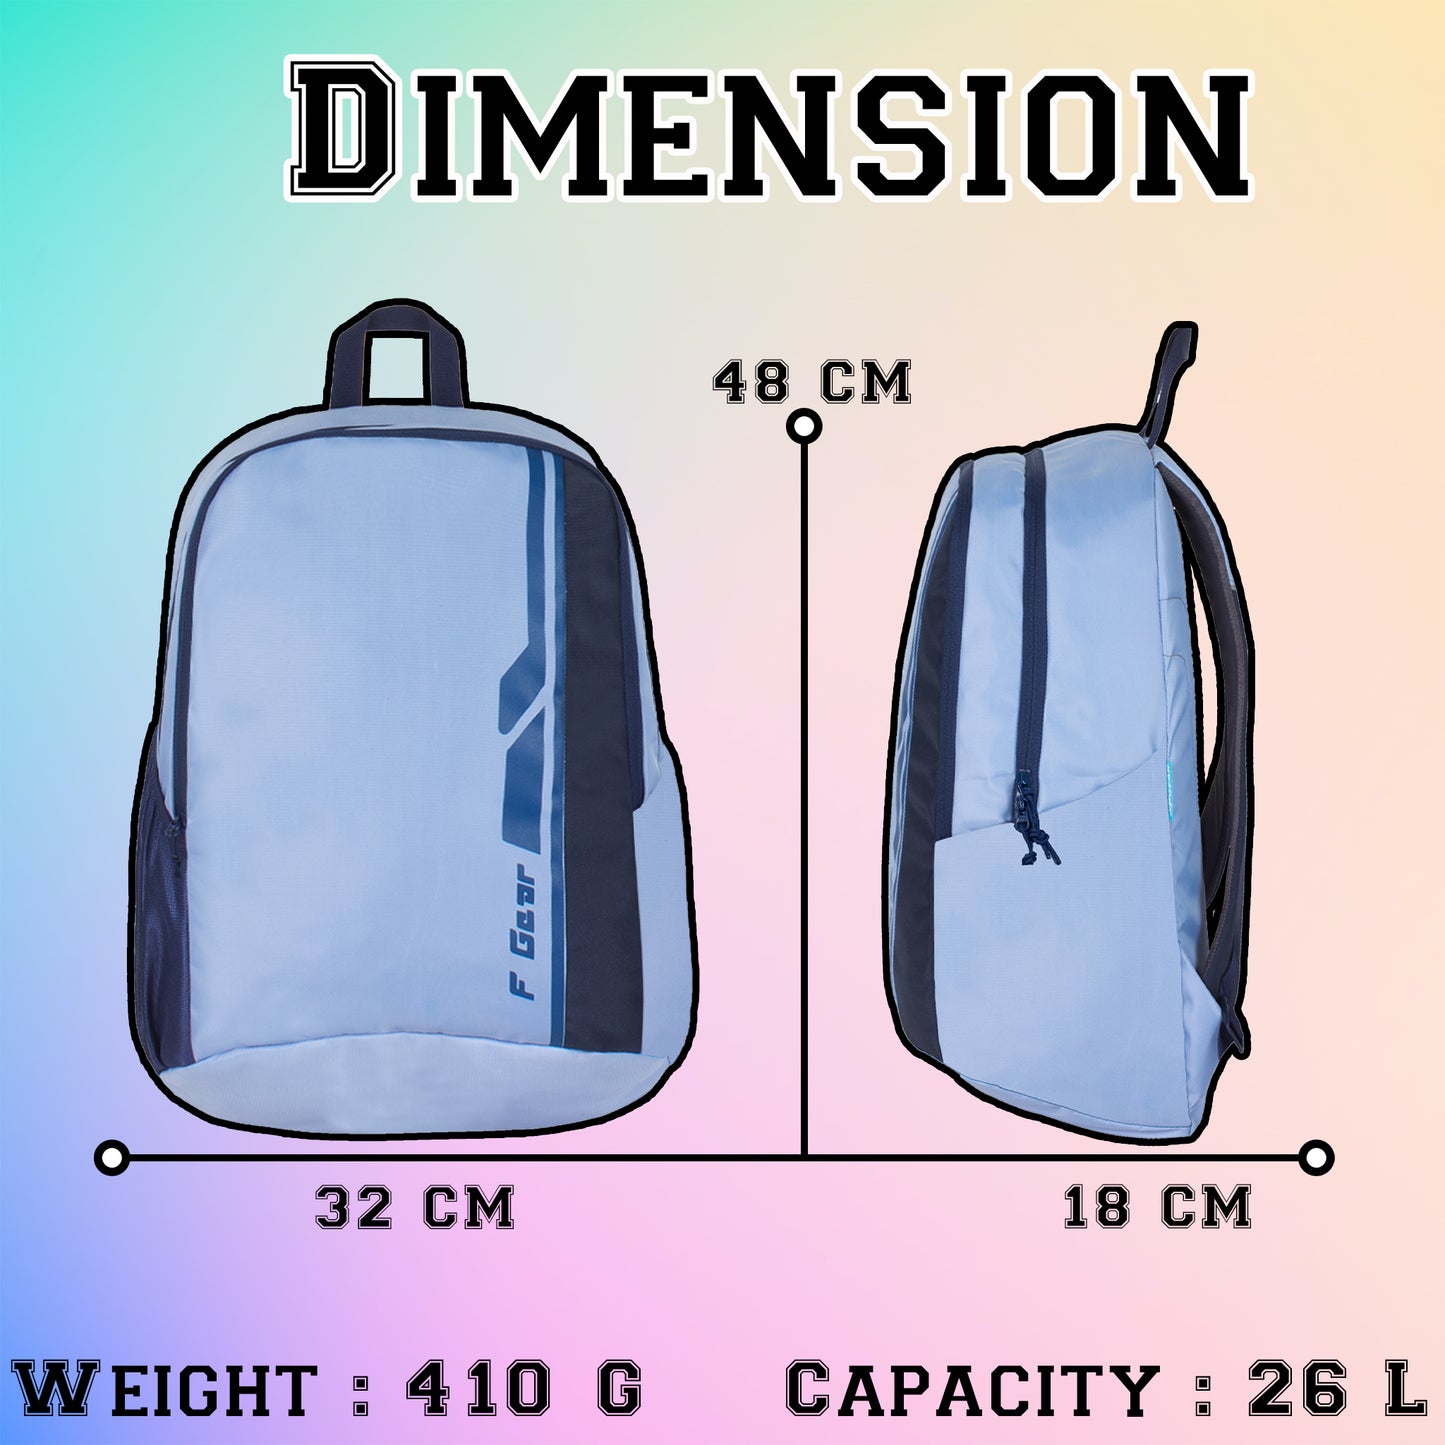 Scholar 26L Light Blue and Navy Backpack